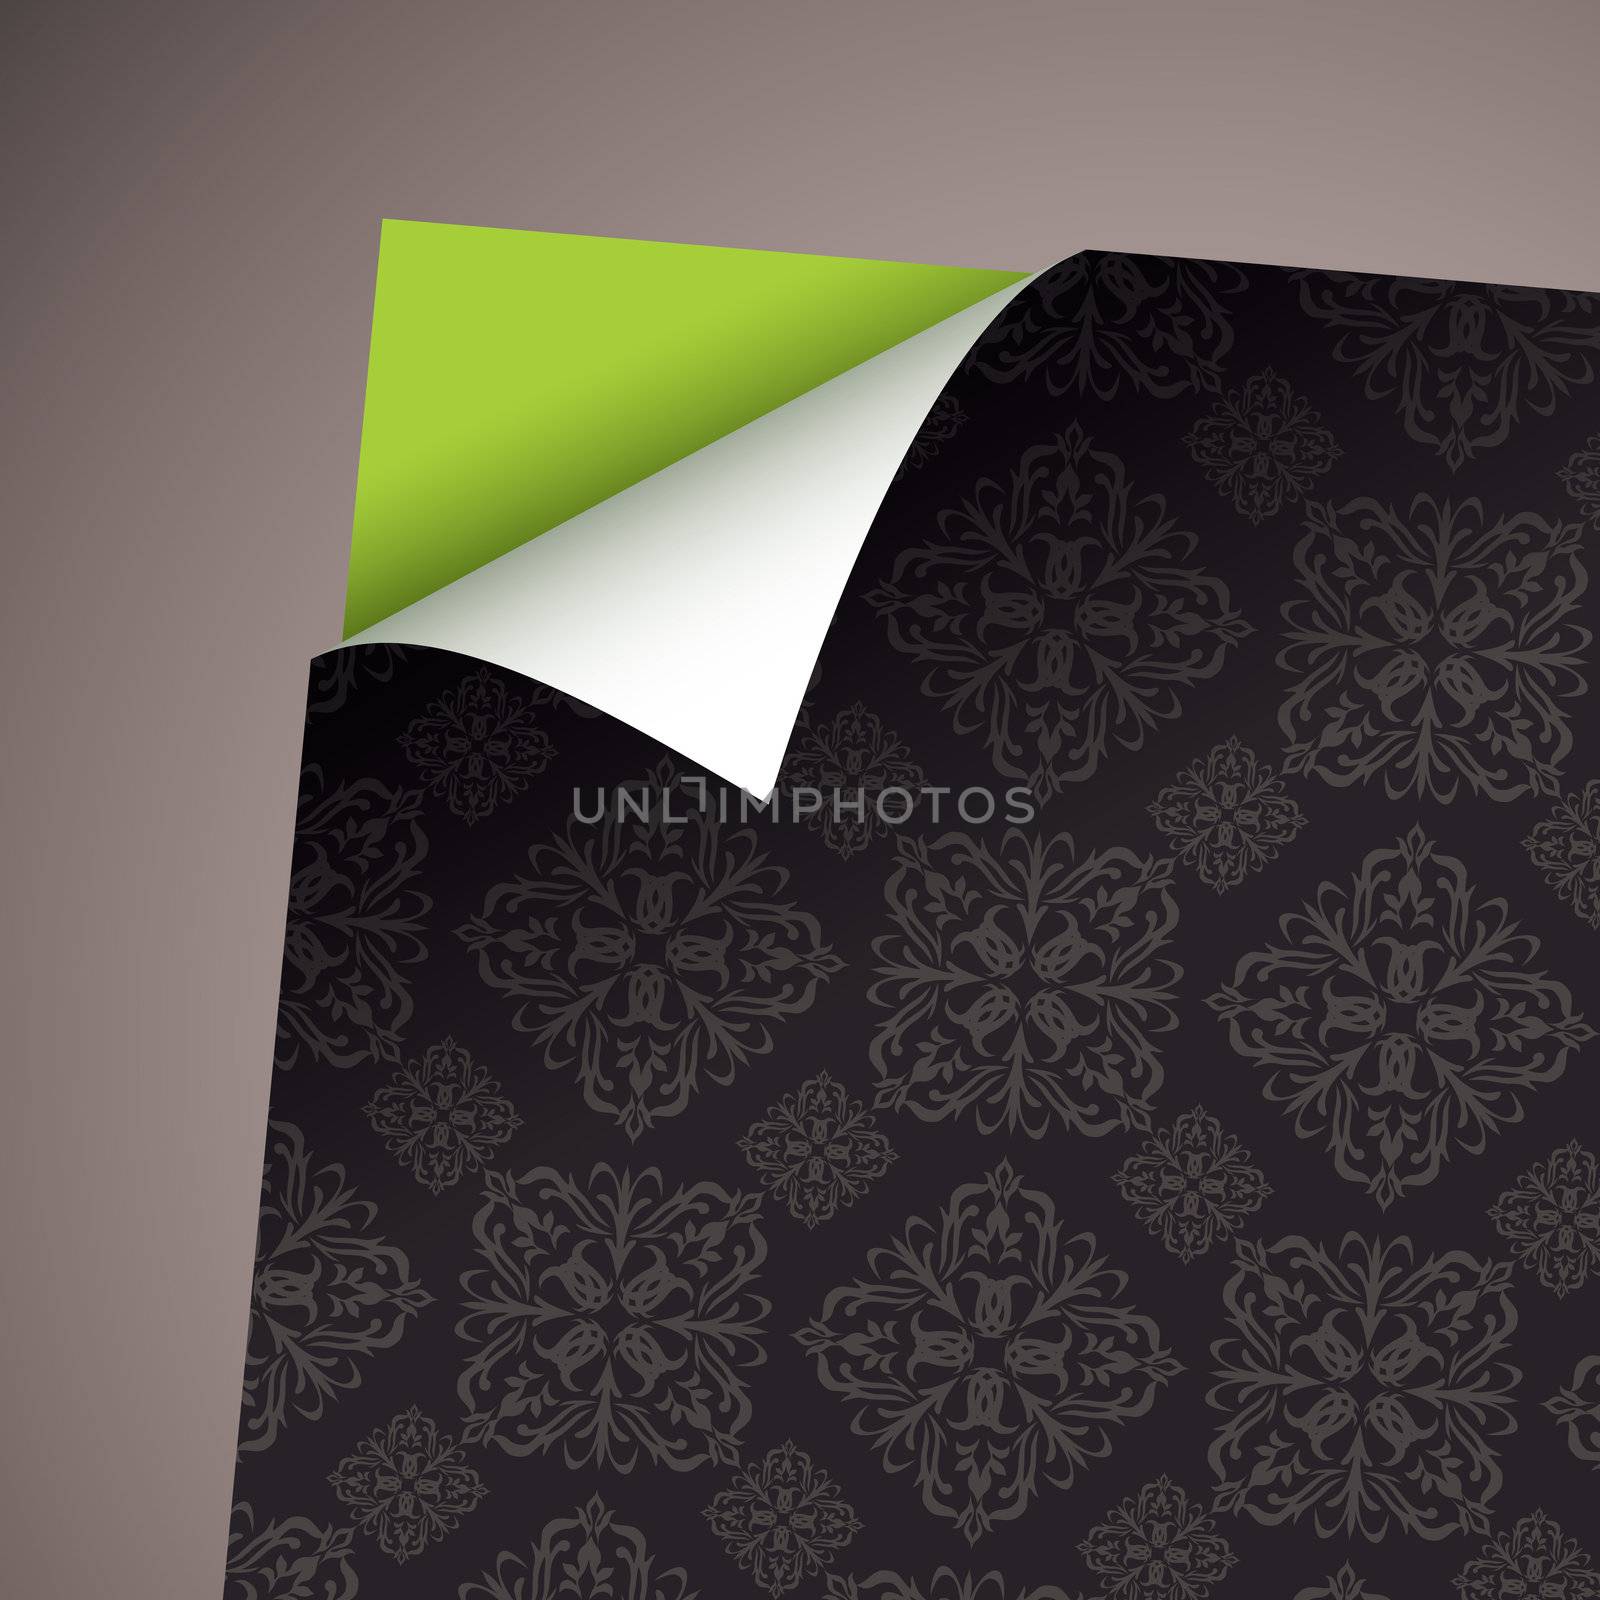 Retro wallpaper pattern background with green card and shadow